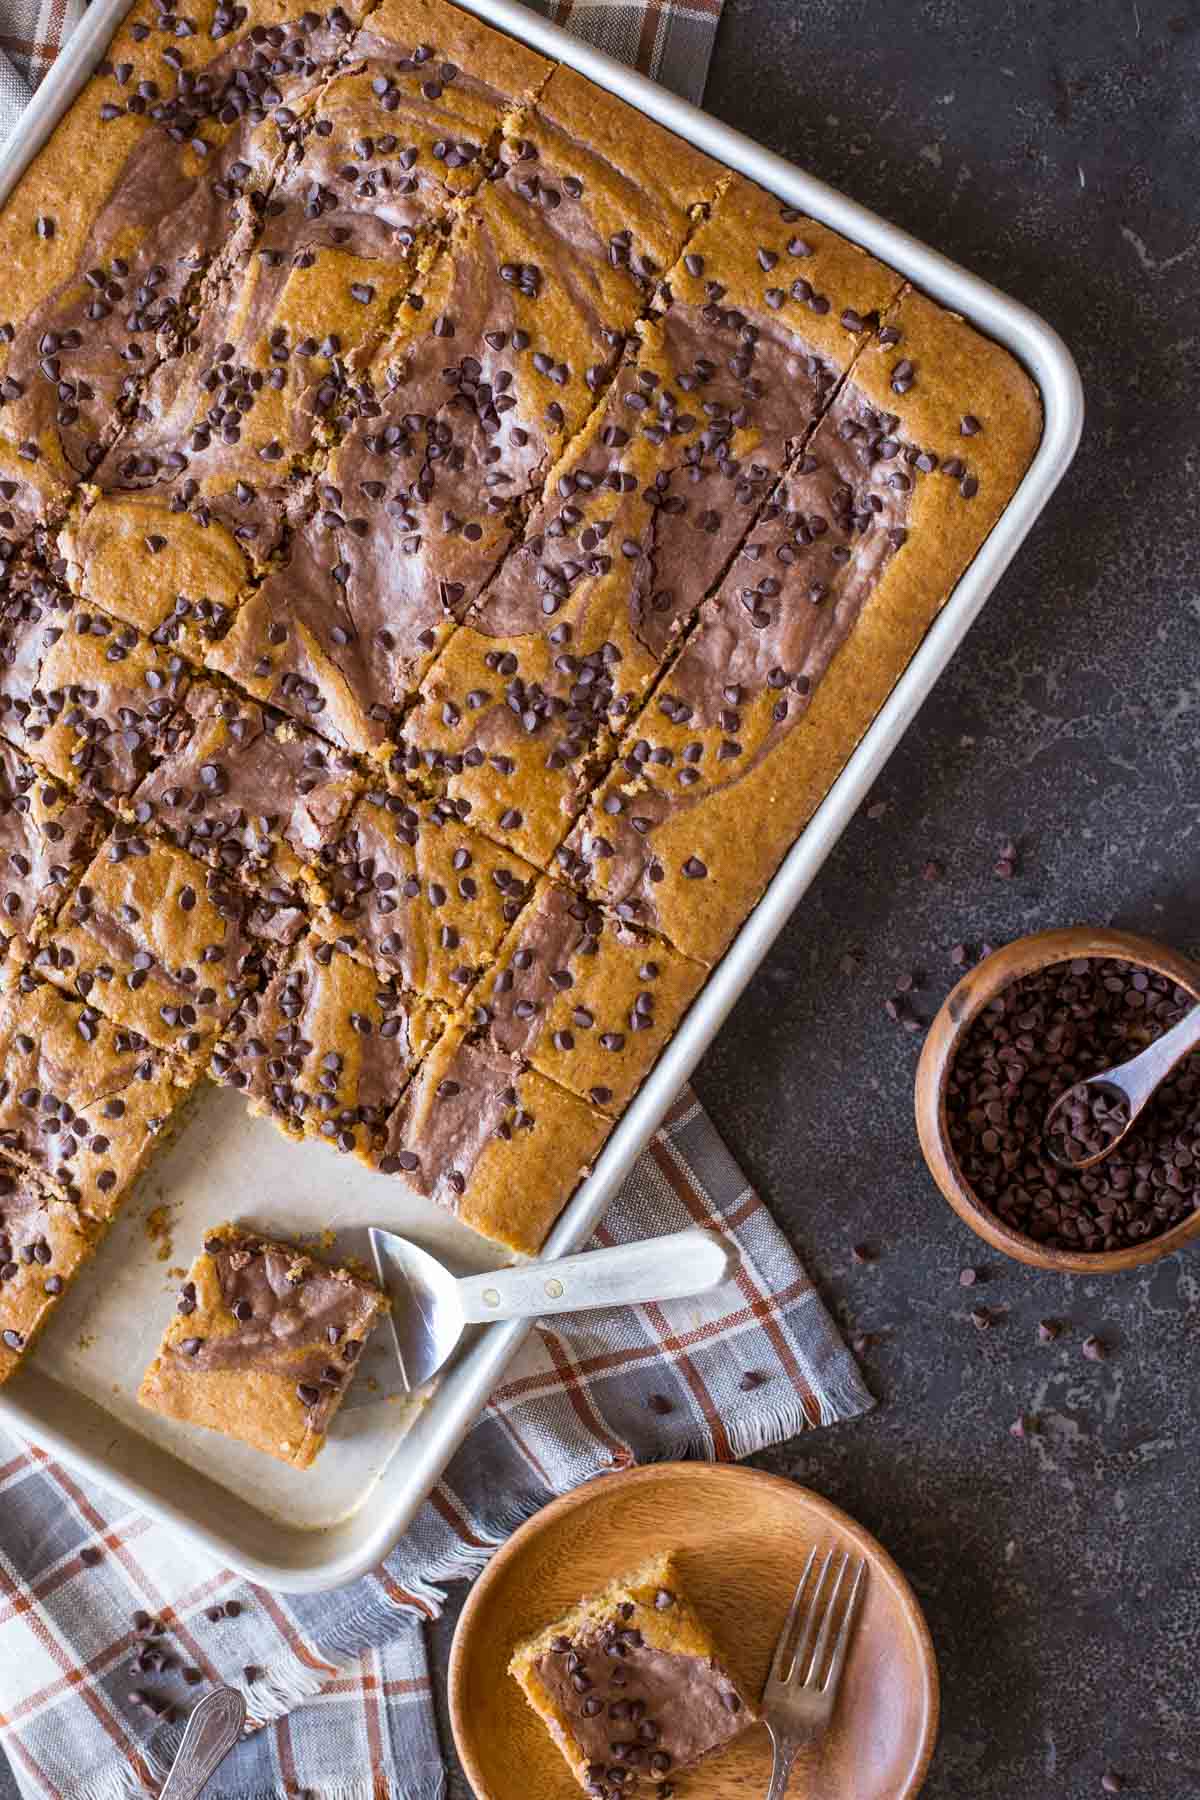 Chocolate-Swirled Pumpkin Bars cut in a baking pan with a serving spatula under one of the bars, and a wood plate sitting next to the pan with a Chocolate-Swirled Pumpkin Bar on it with a fork, and a wood bowl of chocolate chips next to the pan. 